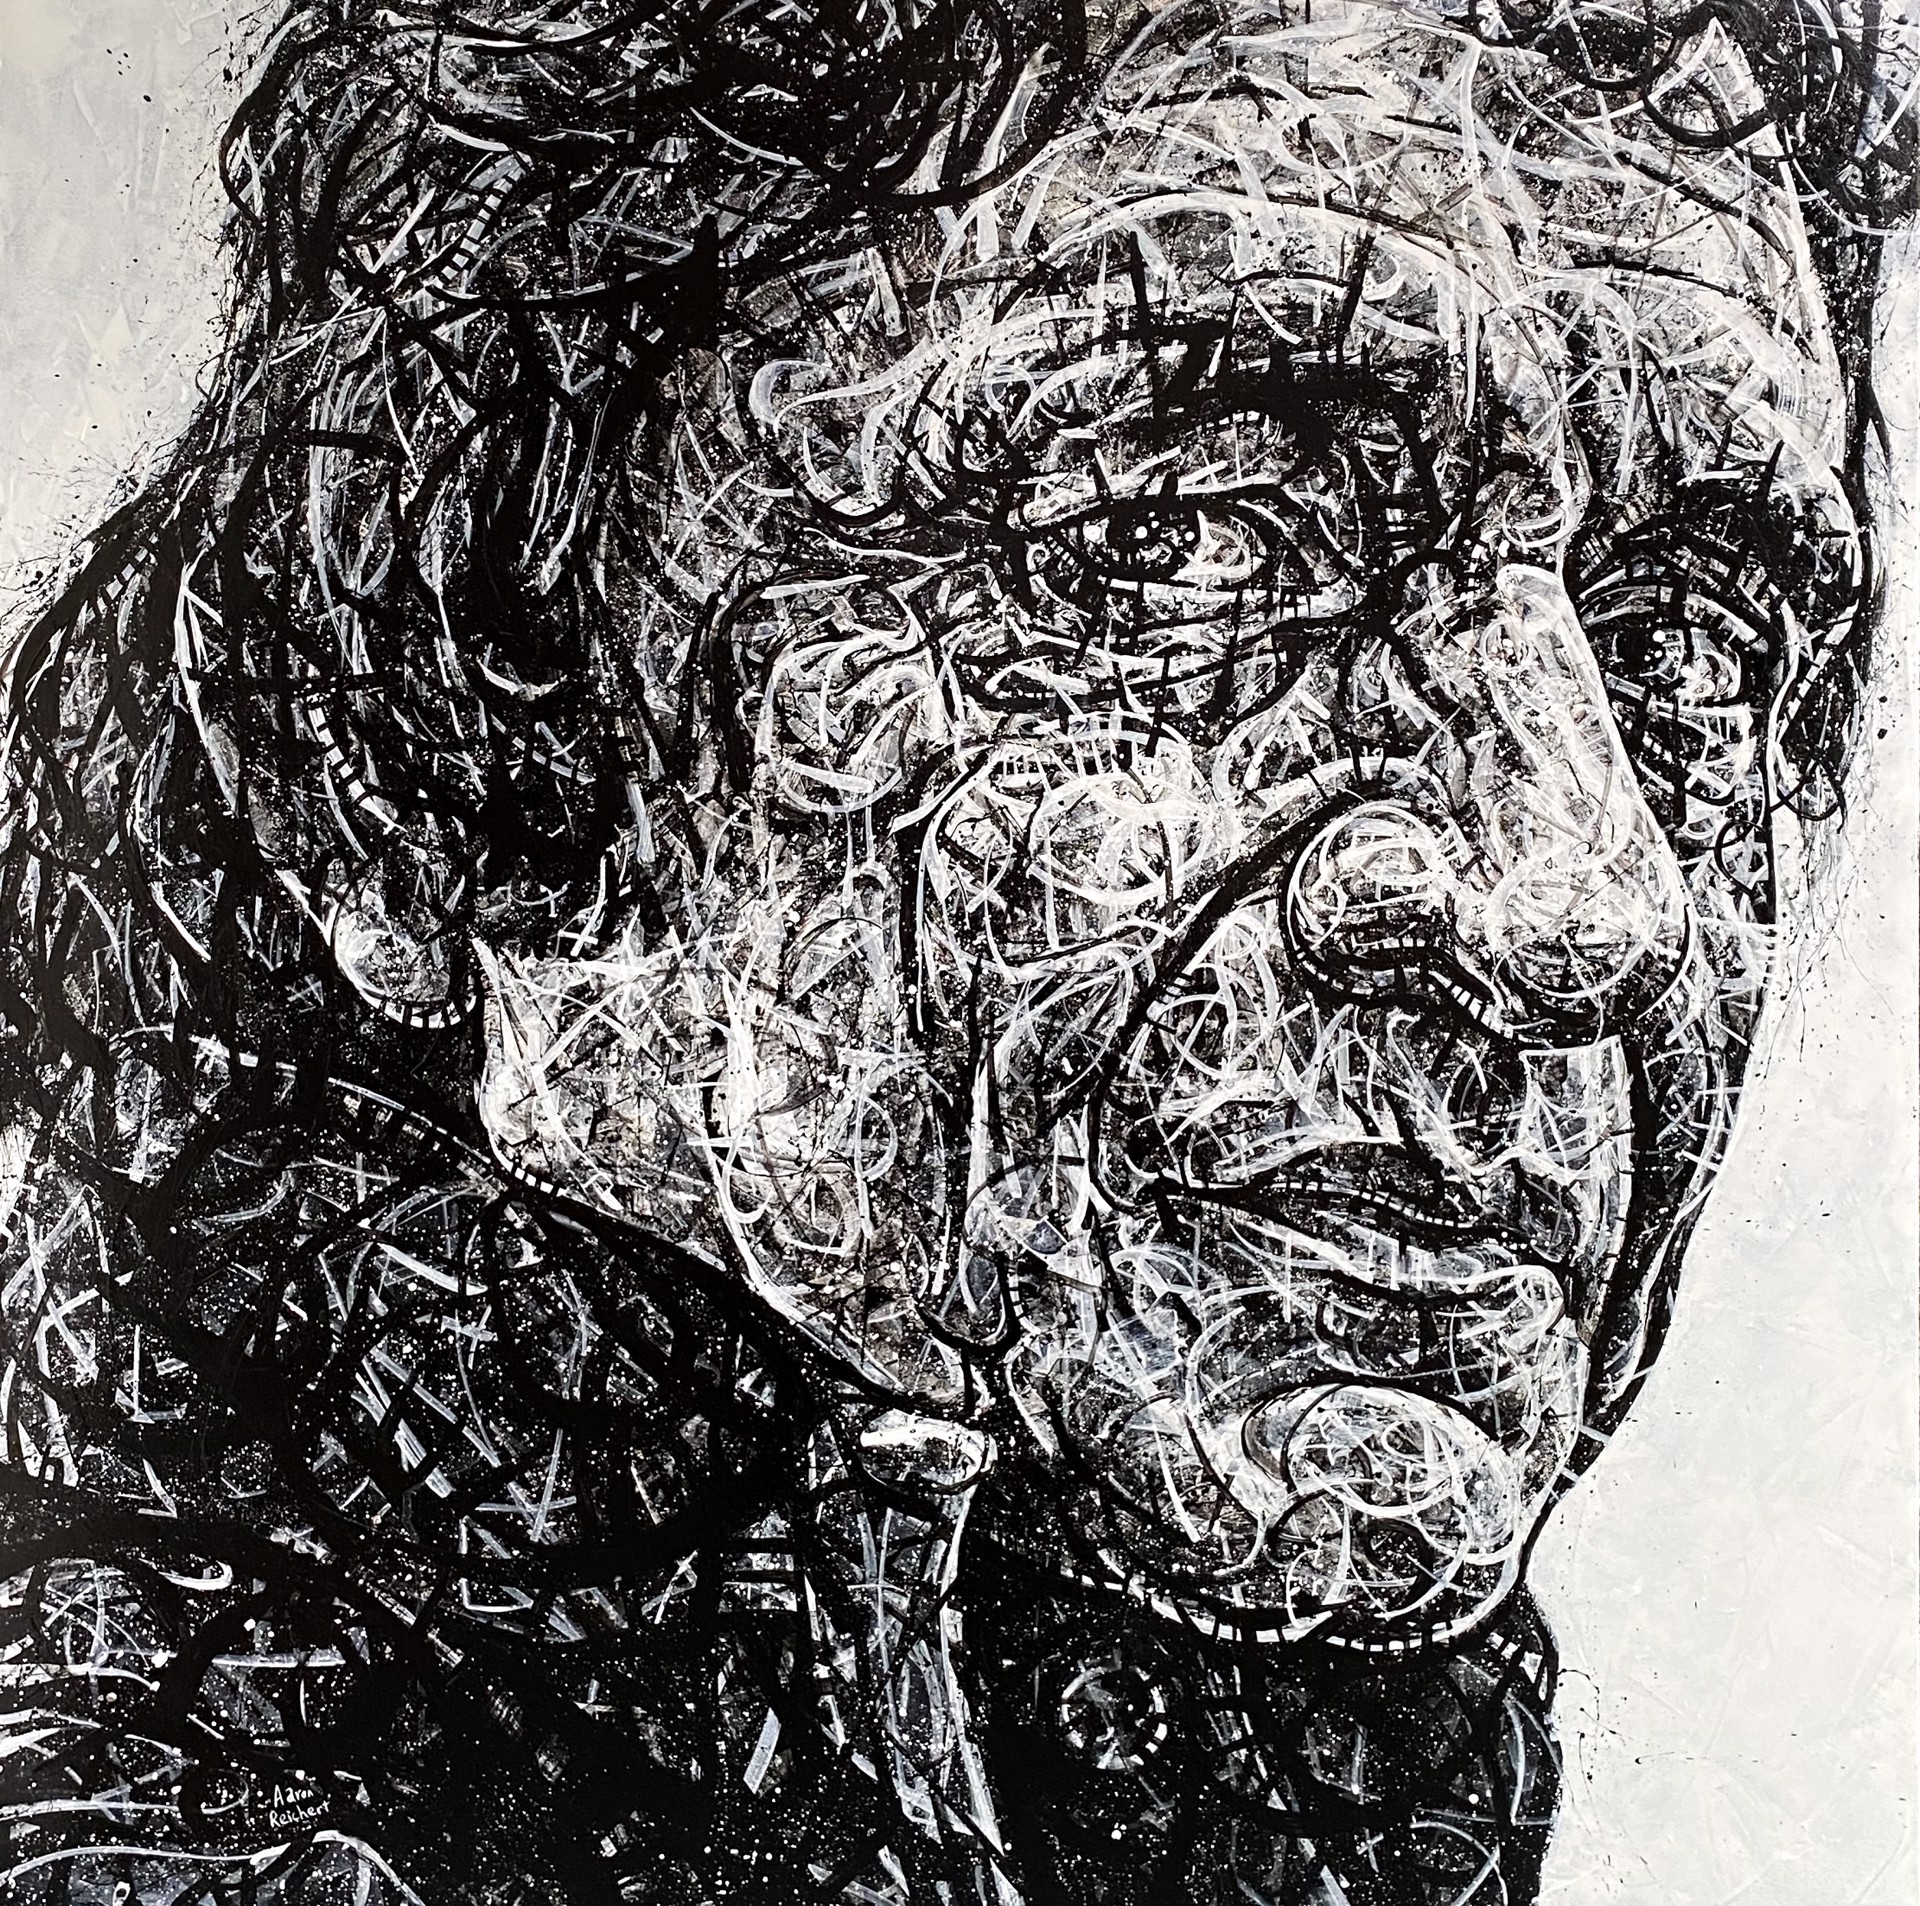 Johnny Cash, Wanted Man by Aaron Reichert